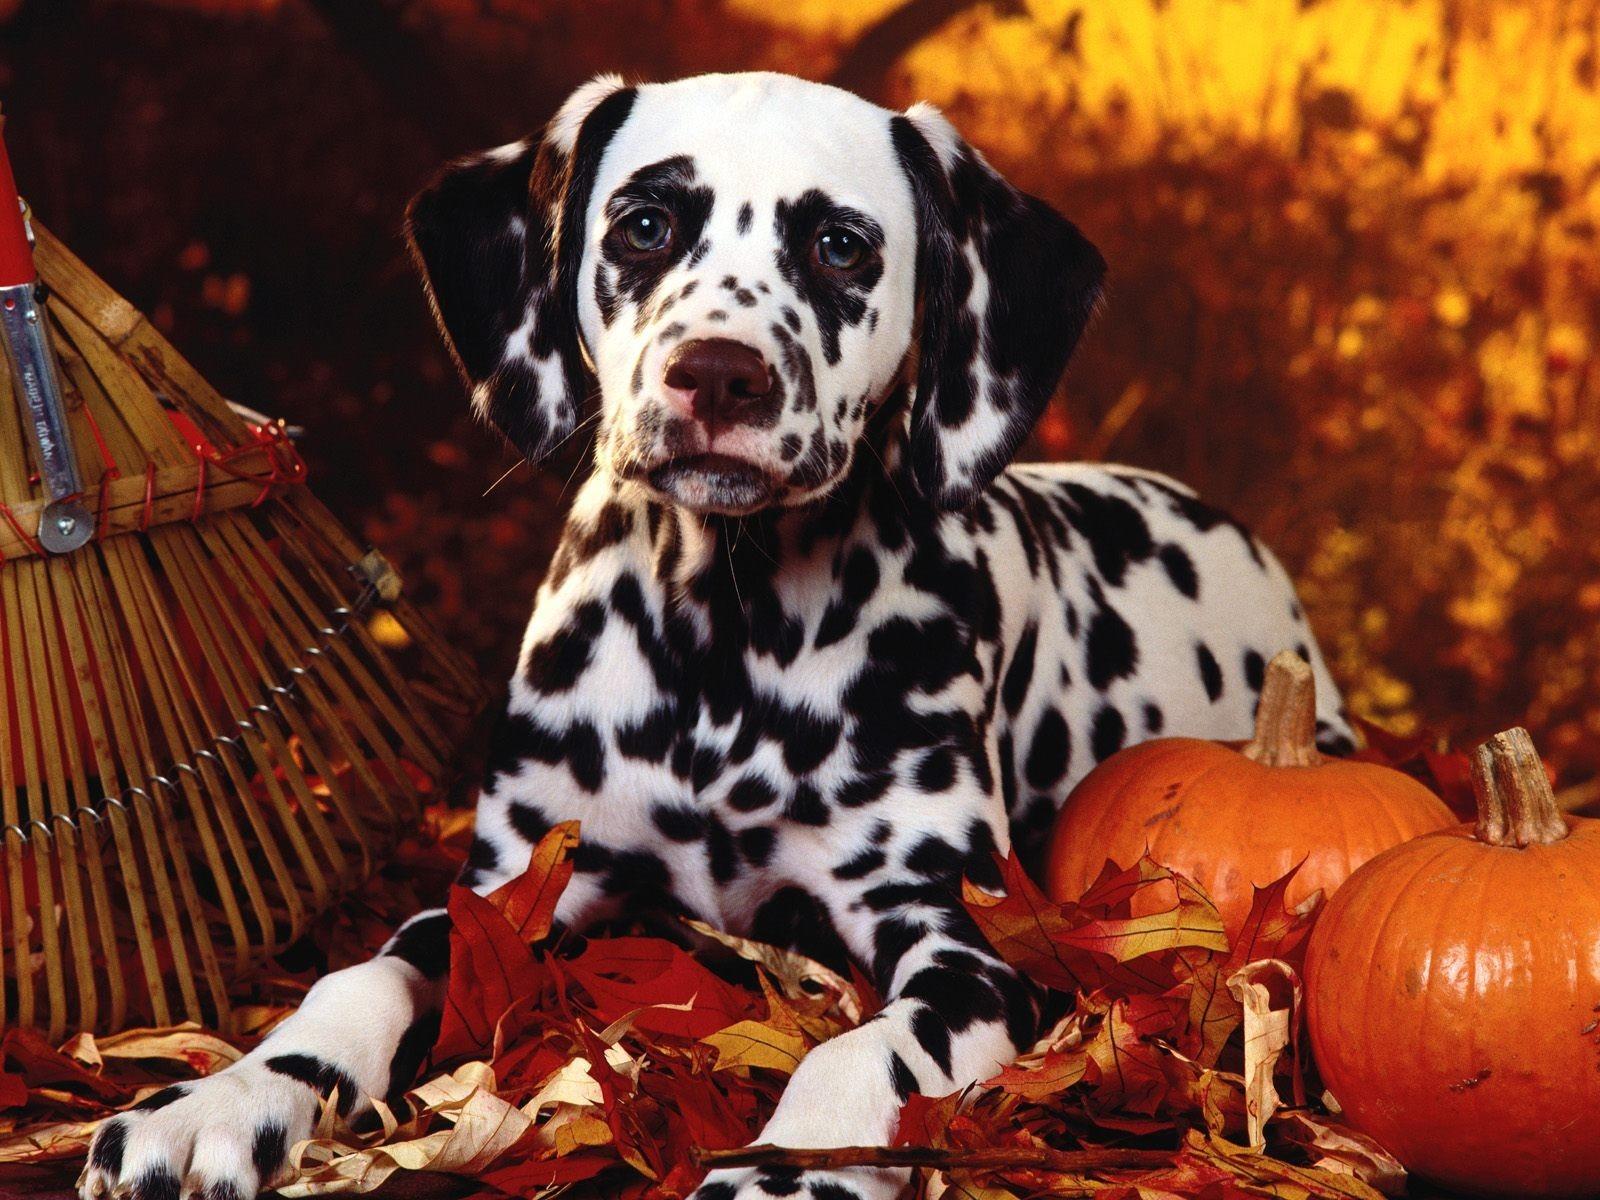 Dalmatian in the halloween theme wallpaper and image